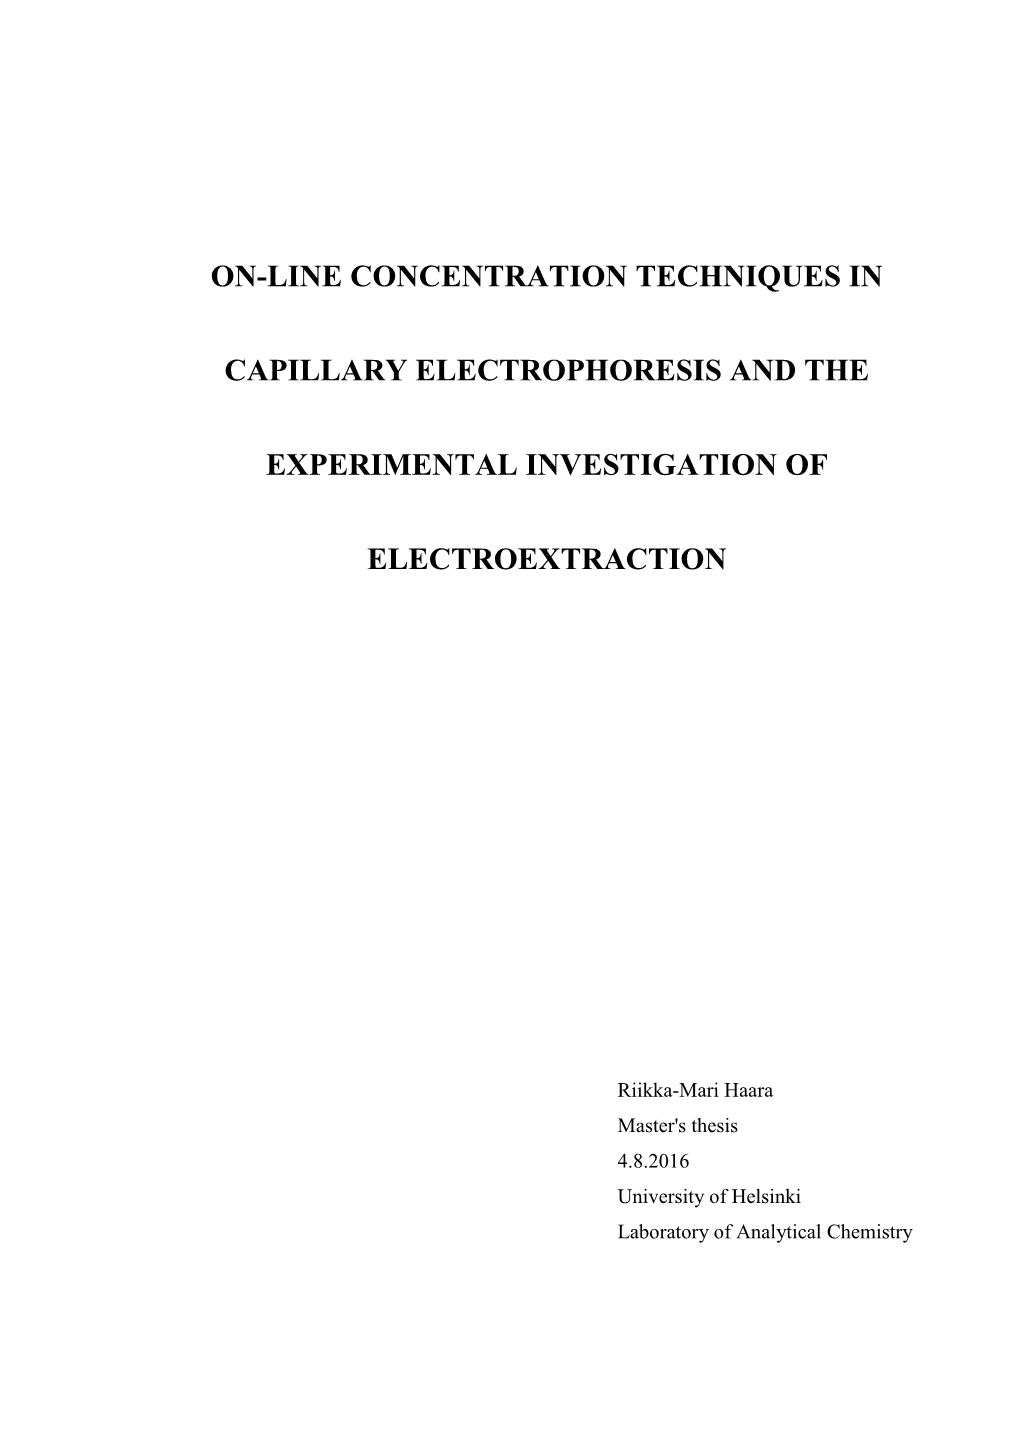 On-Line Concentration Techniques in Capillary Electrophoresis and the Experimental Investigation of Electroextraction